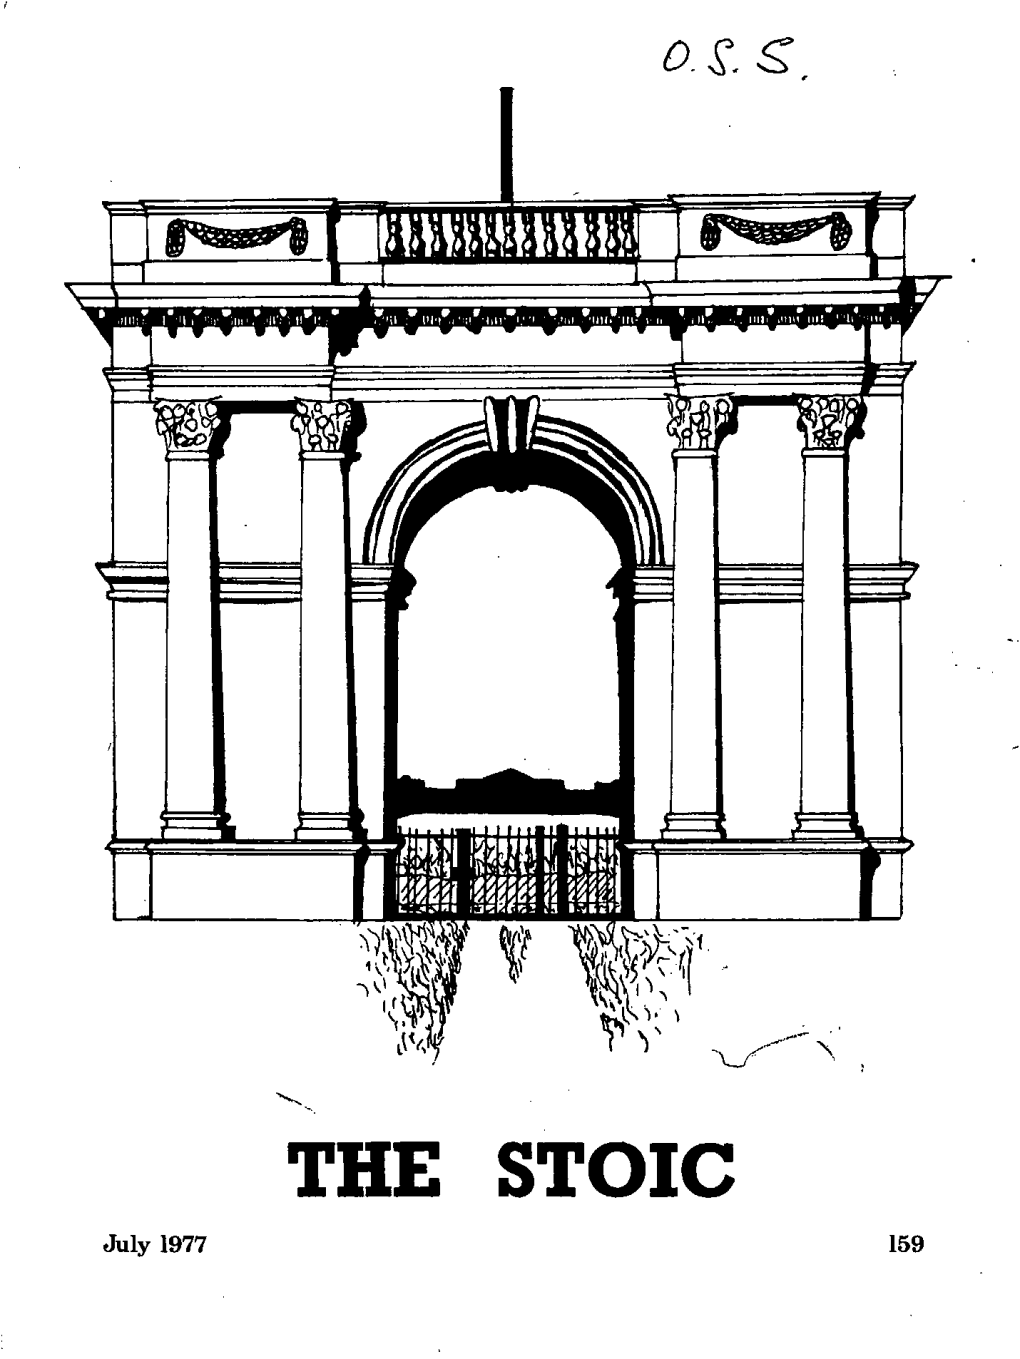 THE STOIC July 1977 159 Vol XXVII Number 2 July 1977 EDITORIAL